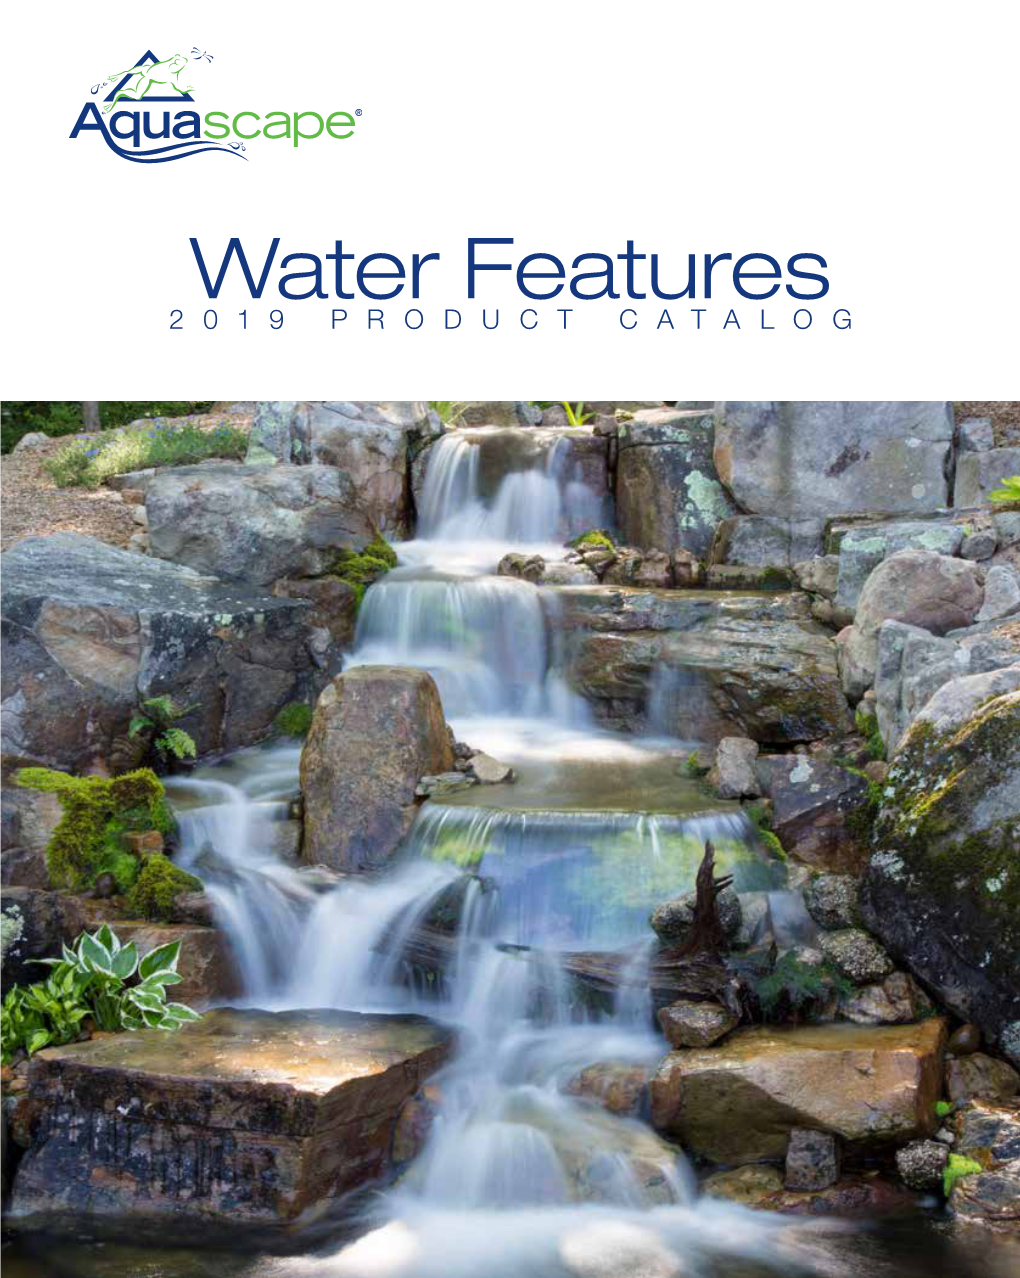 Water Features 2019 PRODUCT CATALOG the Leading Water Feature Manufacturer in North America